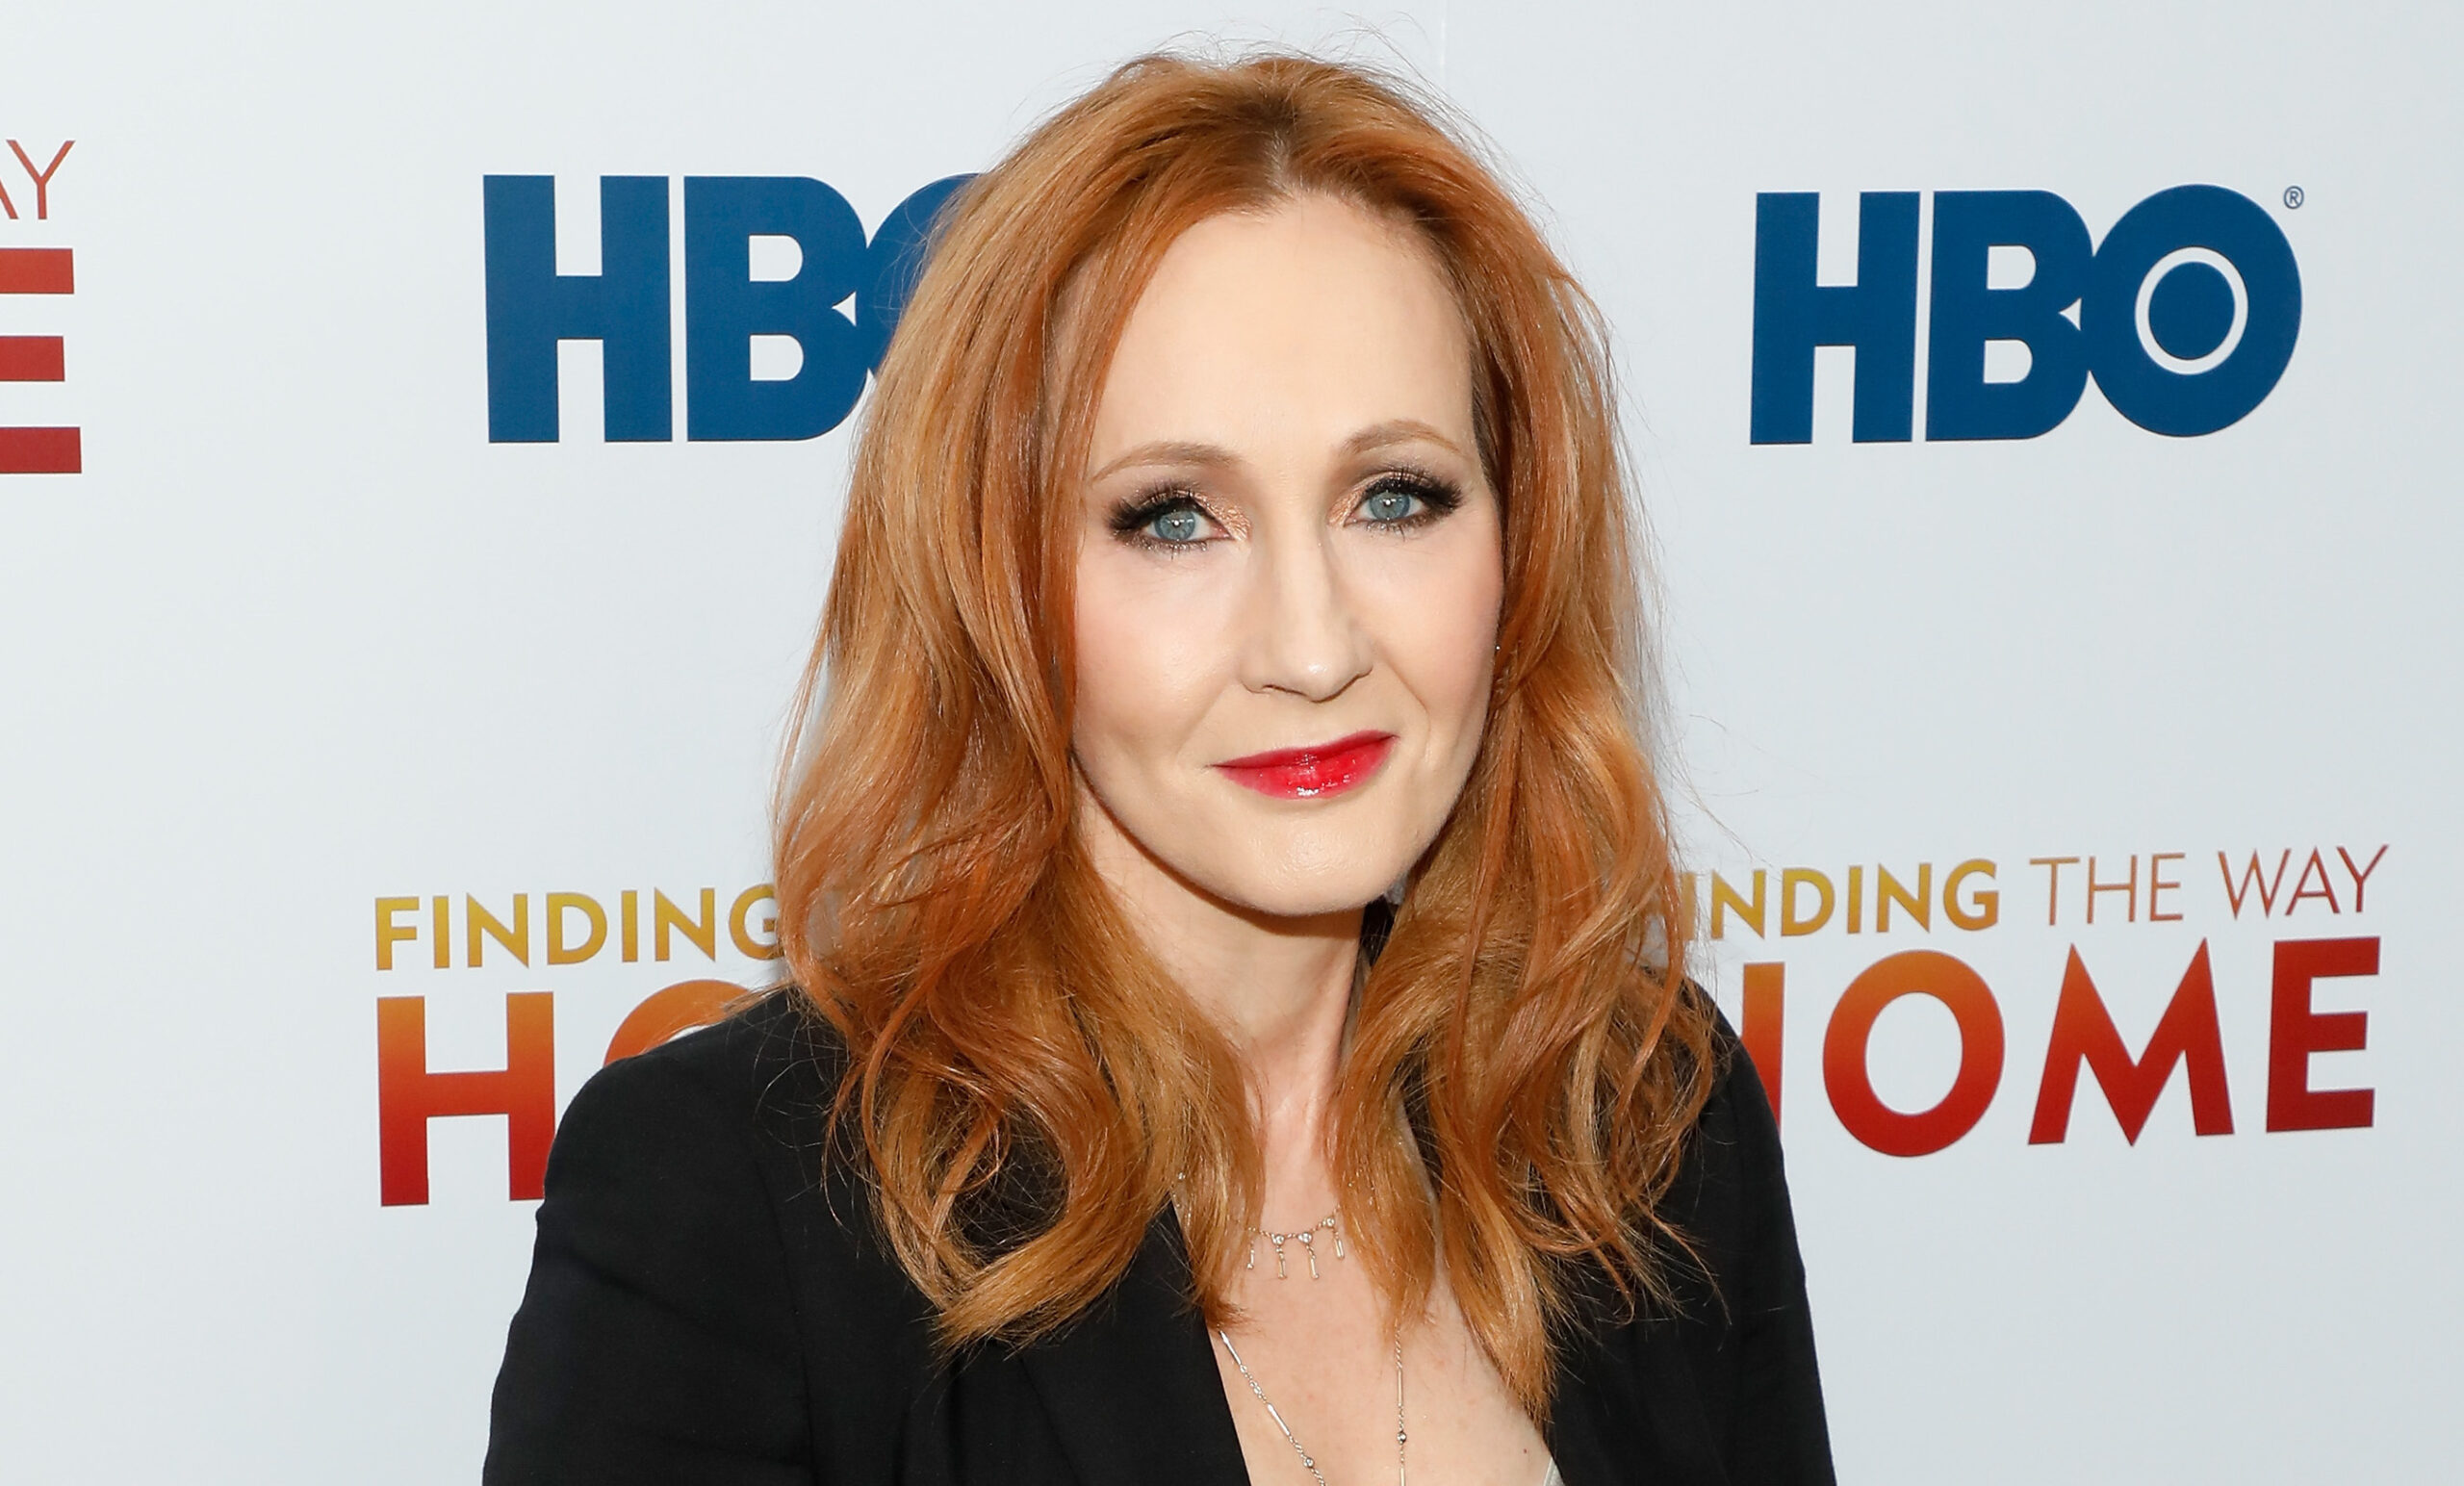 J.K. Rowling dismisses critic’s claim that trans individuals pose no threat in female restrooms.